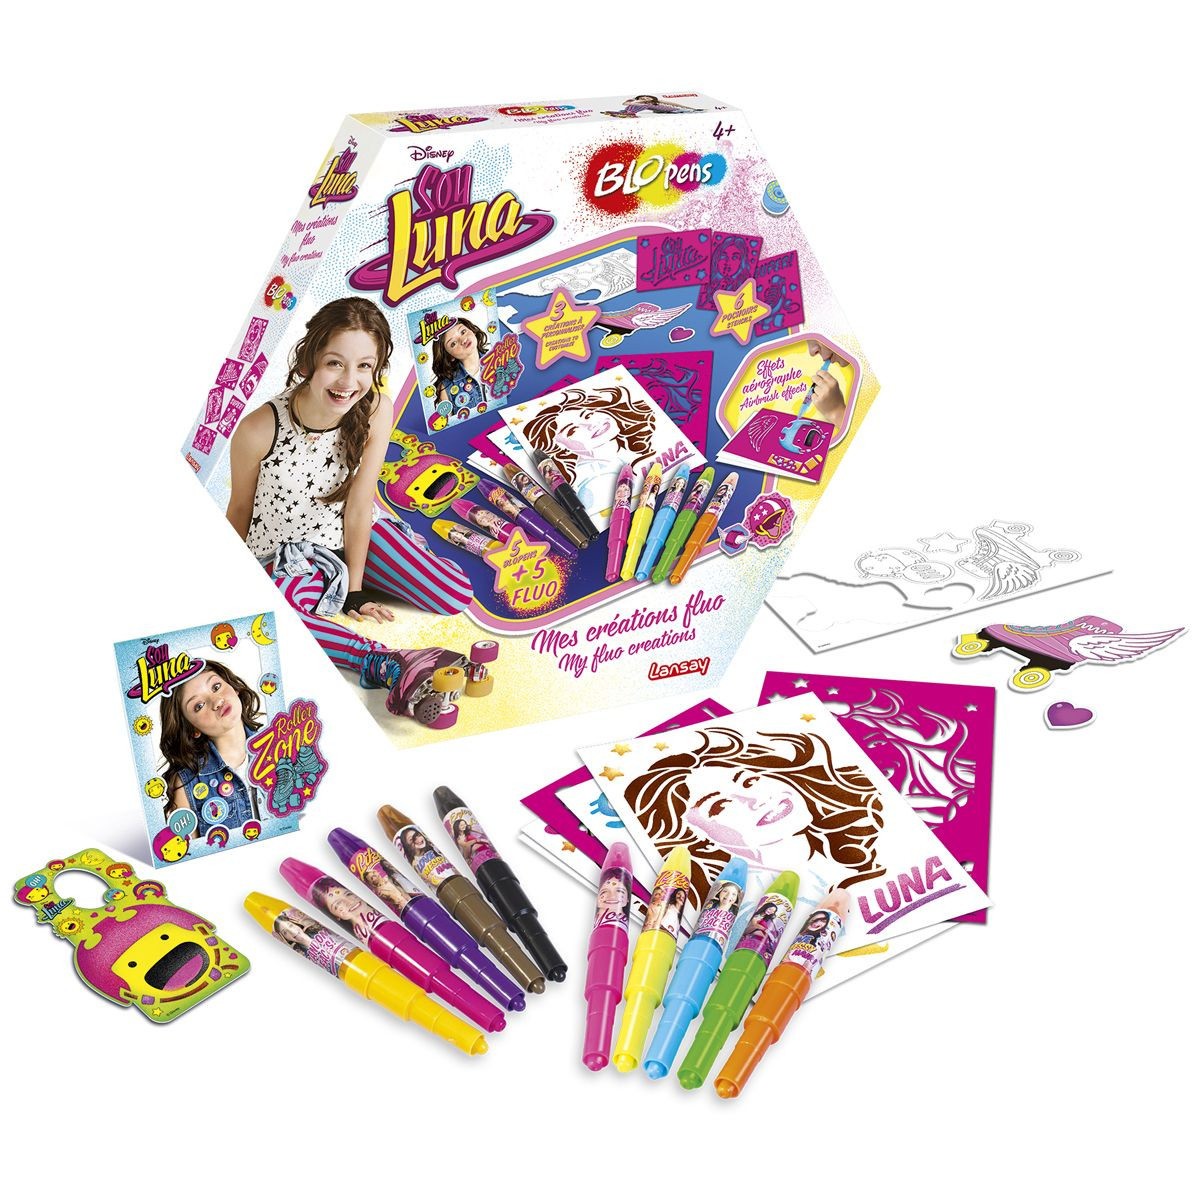 blopens soy luna mes creations fluo